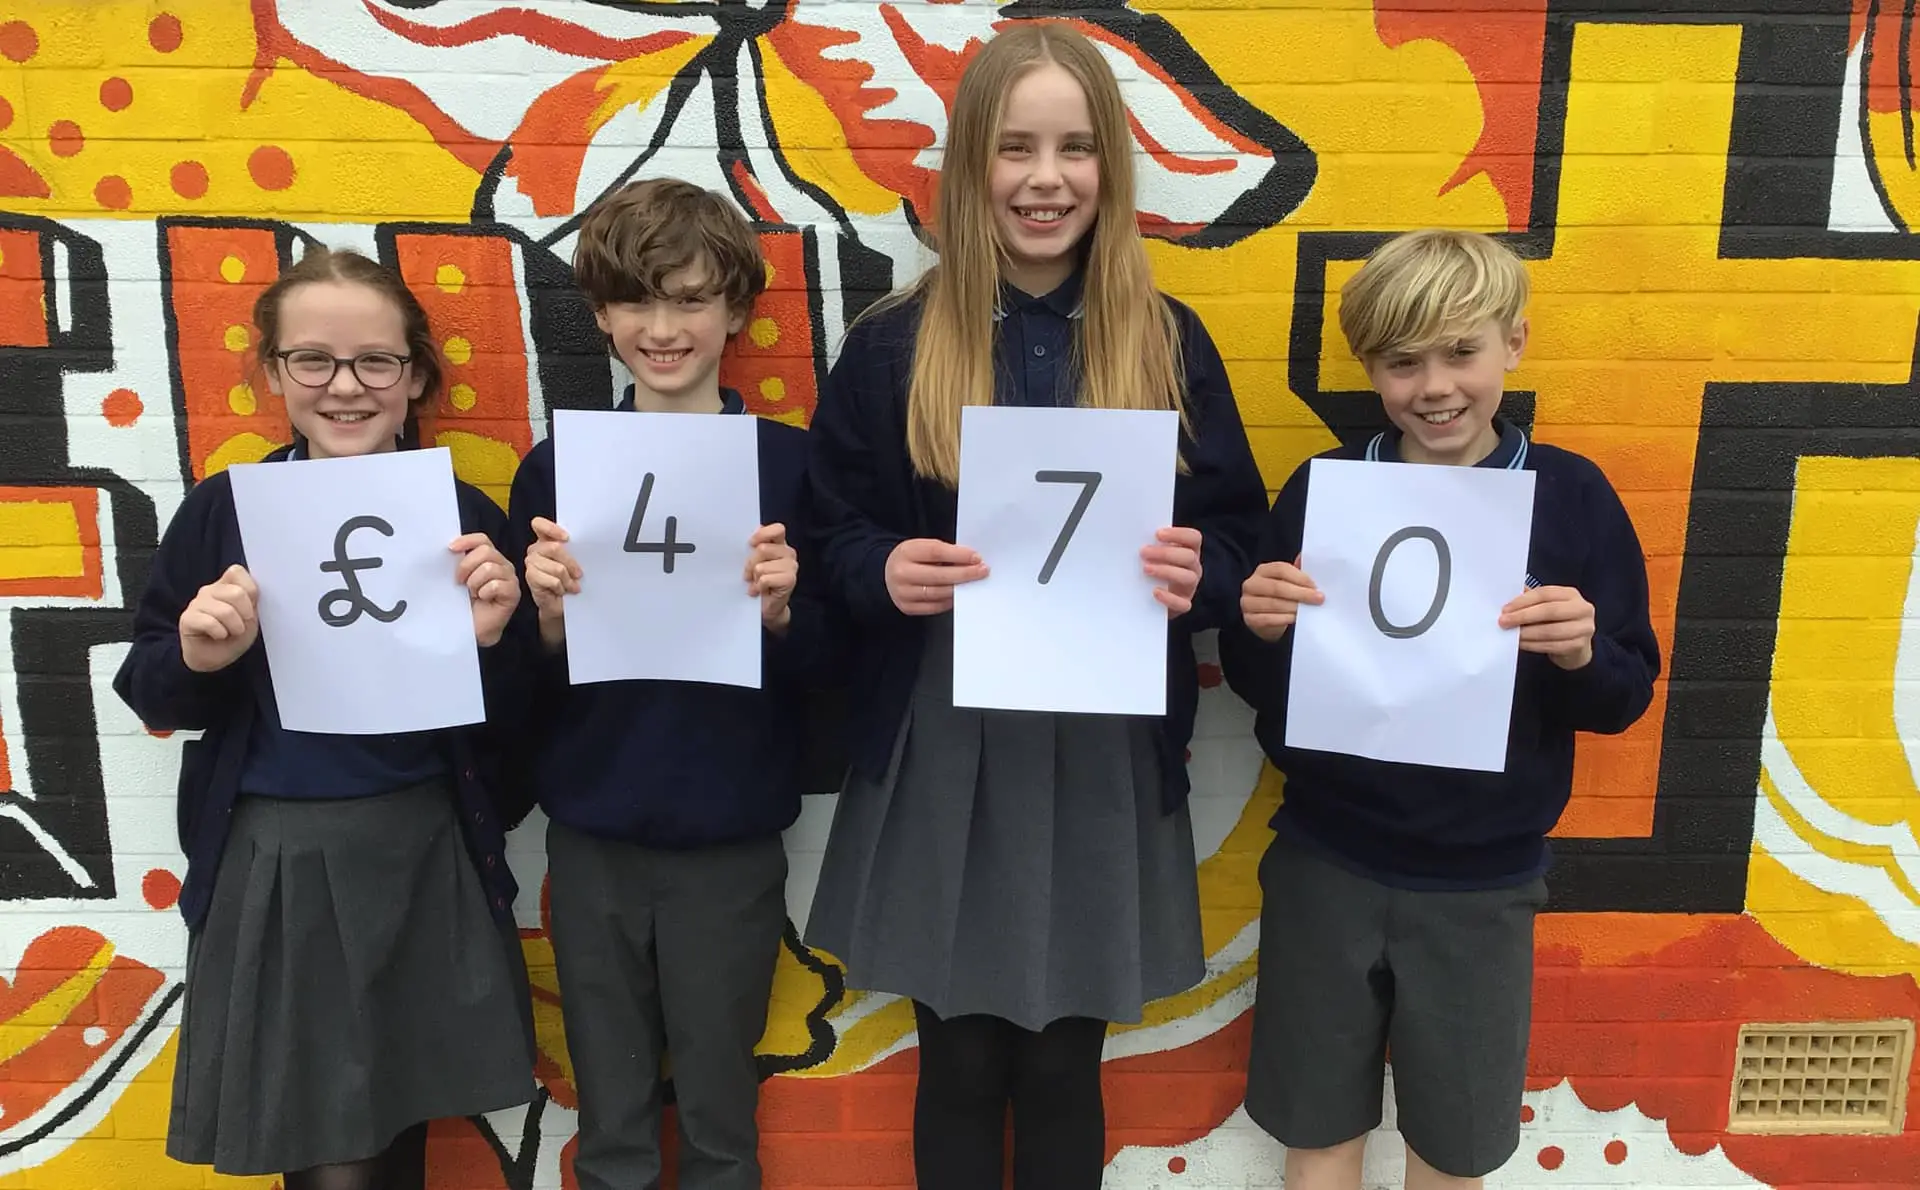 Kids from St Thomas of Canterbury with comic relief earnings